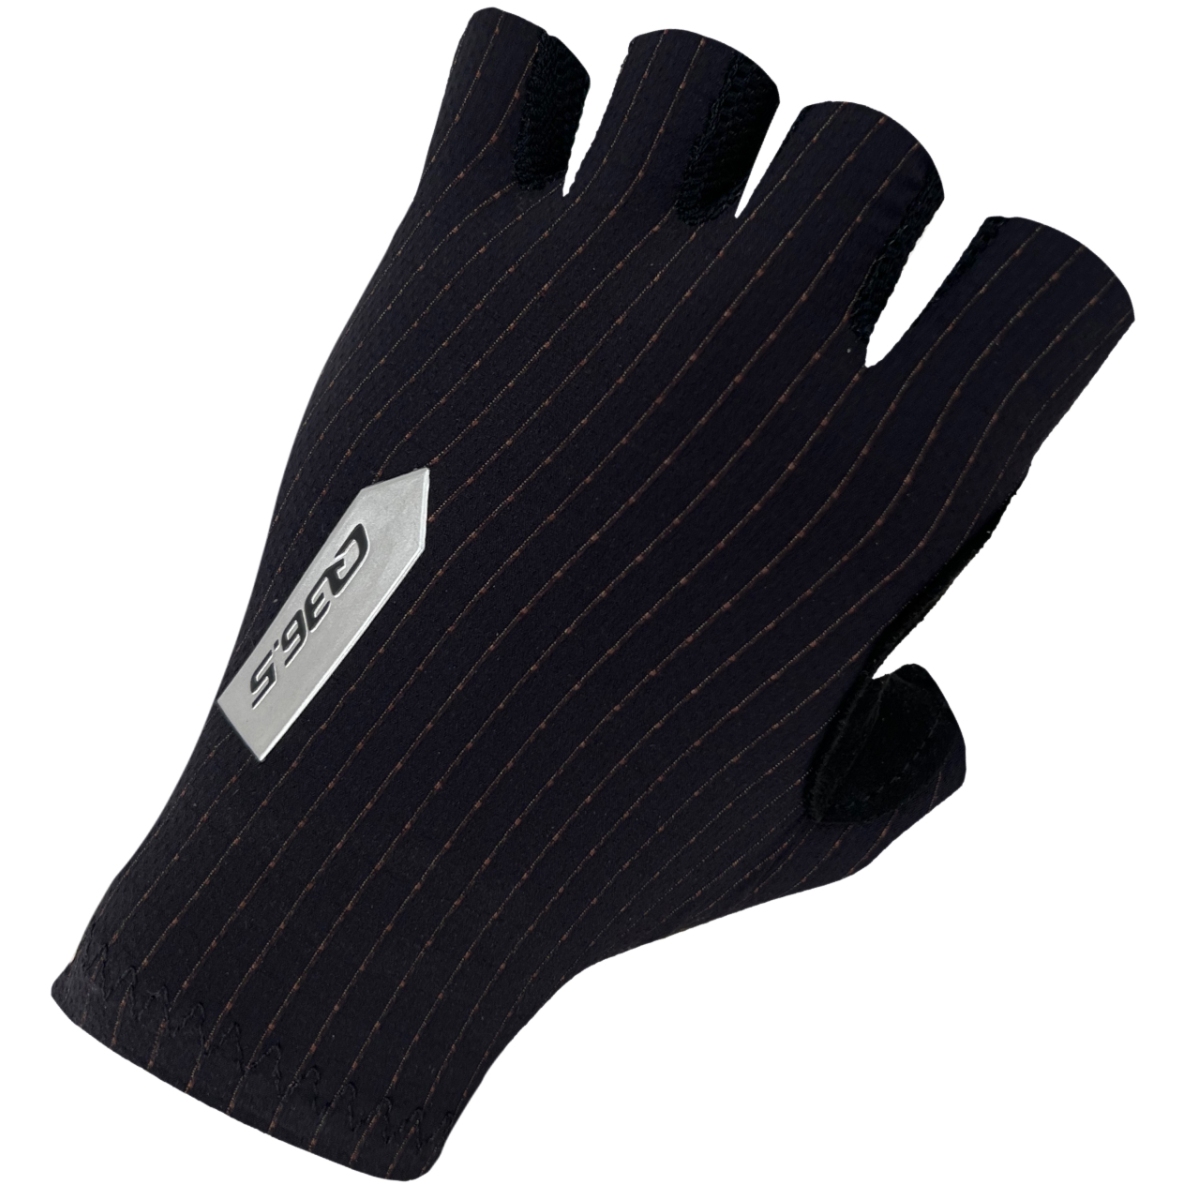 Picture of Q36.5 Pinstripe Summer Cycling Gloves - black